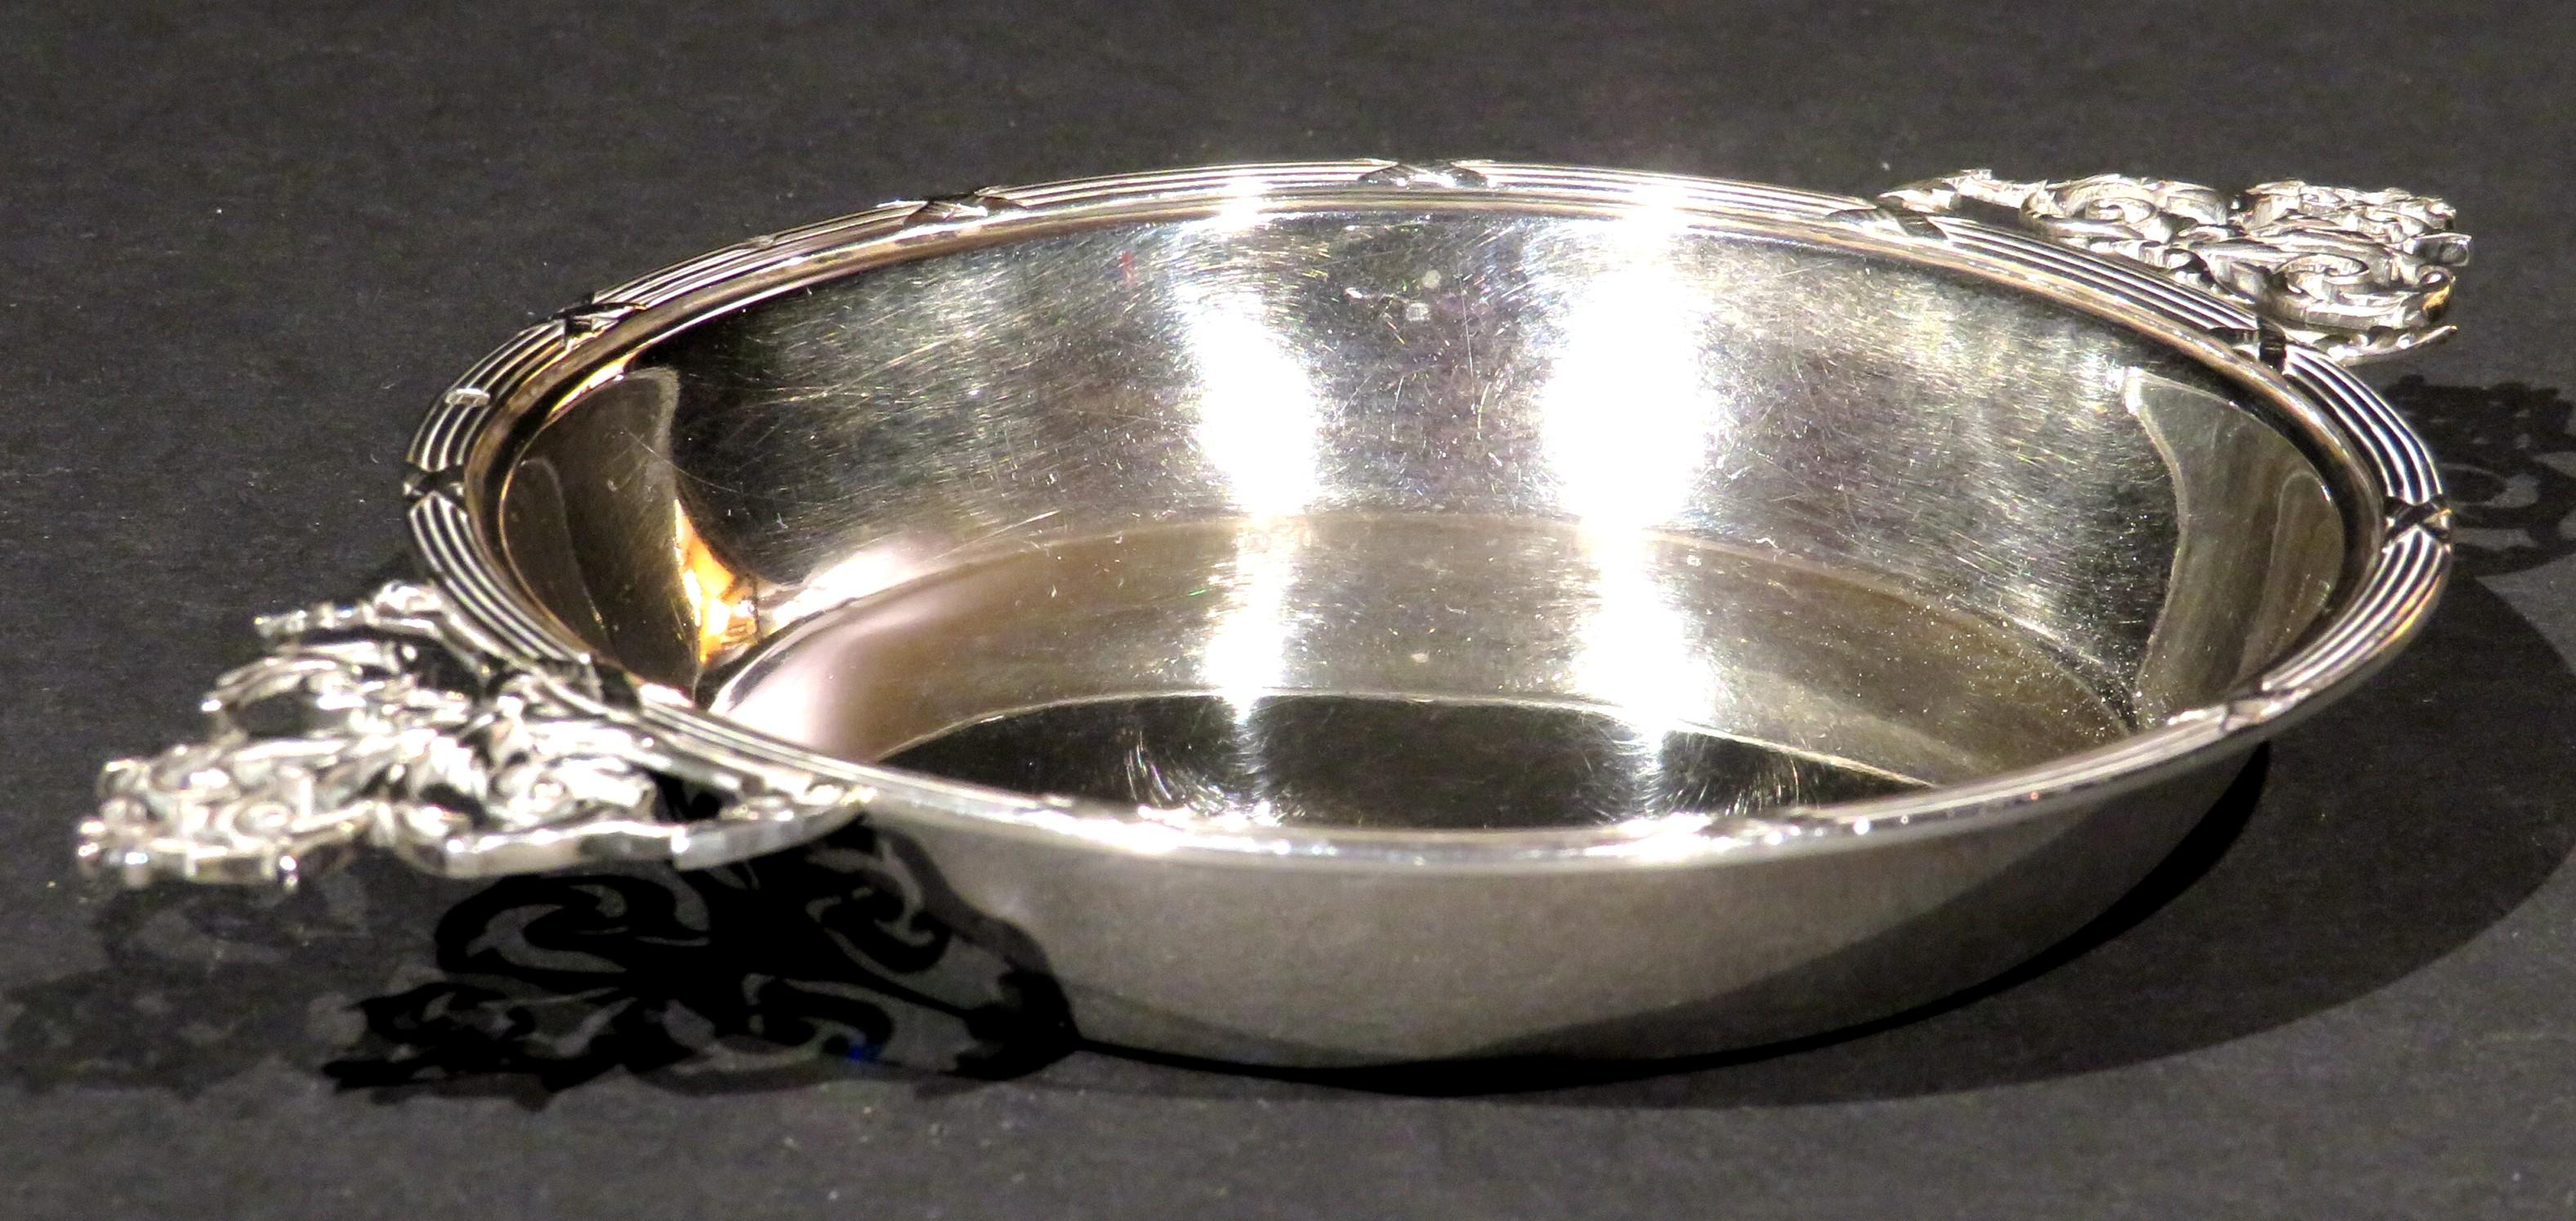 A fine 19th century French silver (.950 fine) porringer or écuelle, showing a circular bowl rising to neoclassical inspired 'reed & ribbon' decorated rim with pierced foliate cast handles, the rim & handles with an impressed Minerva mark denoting